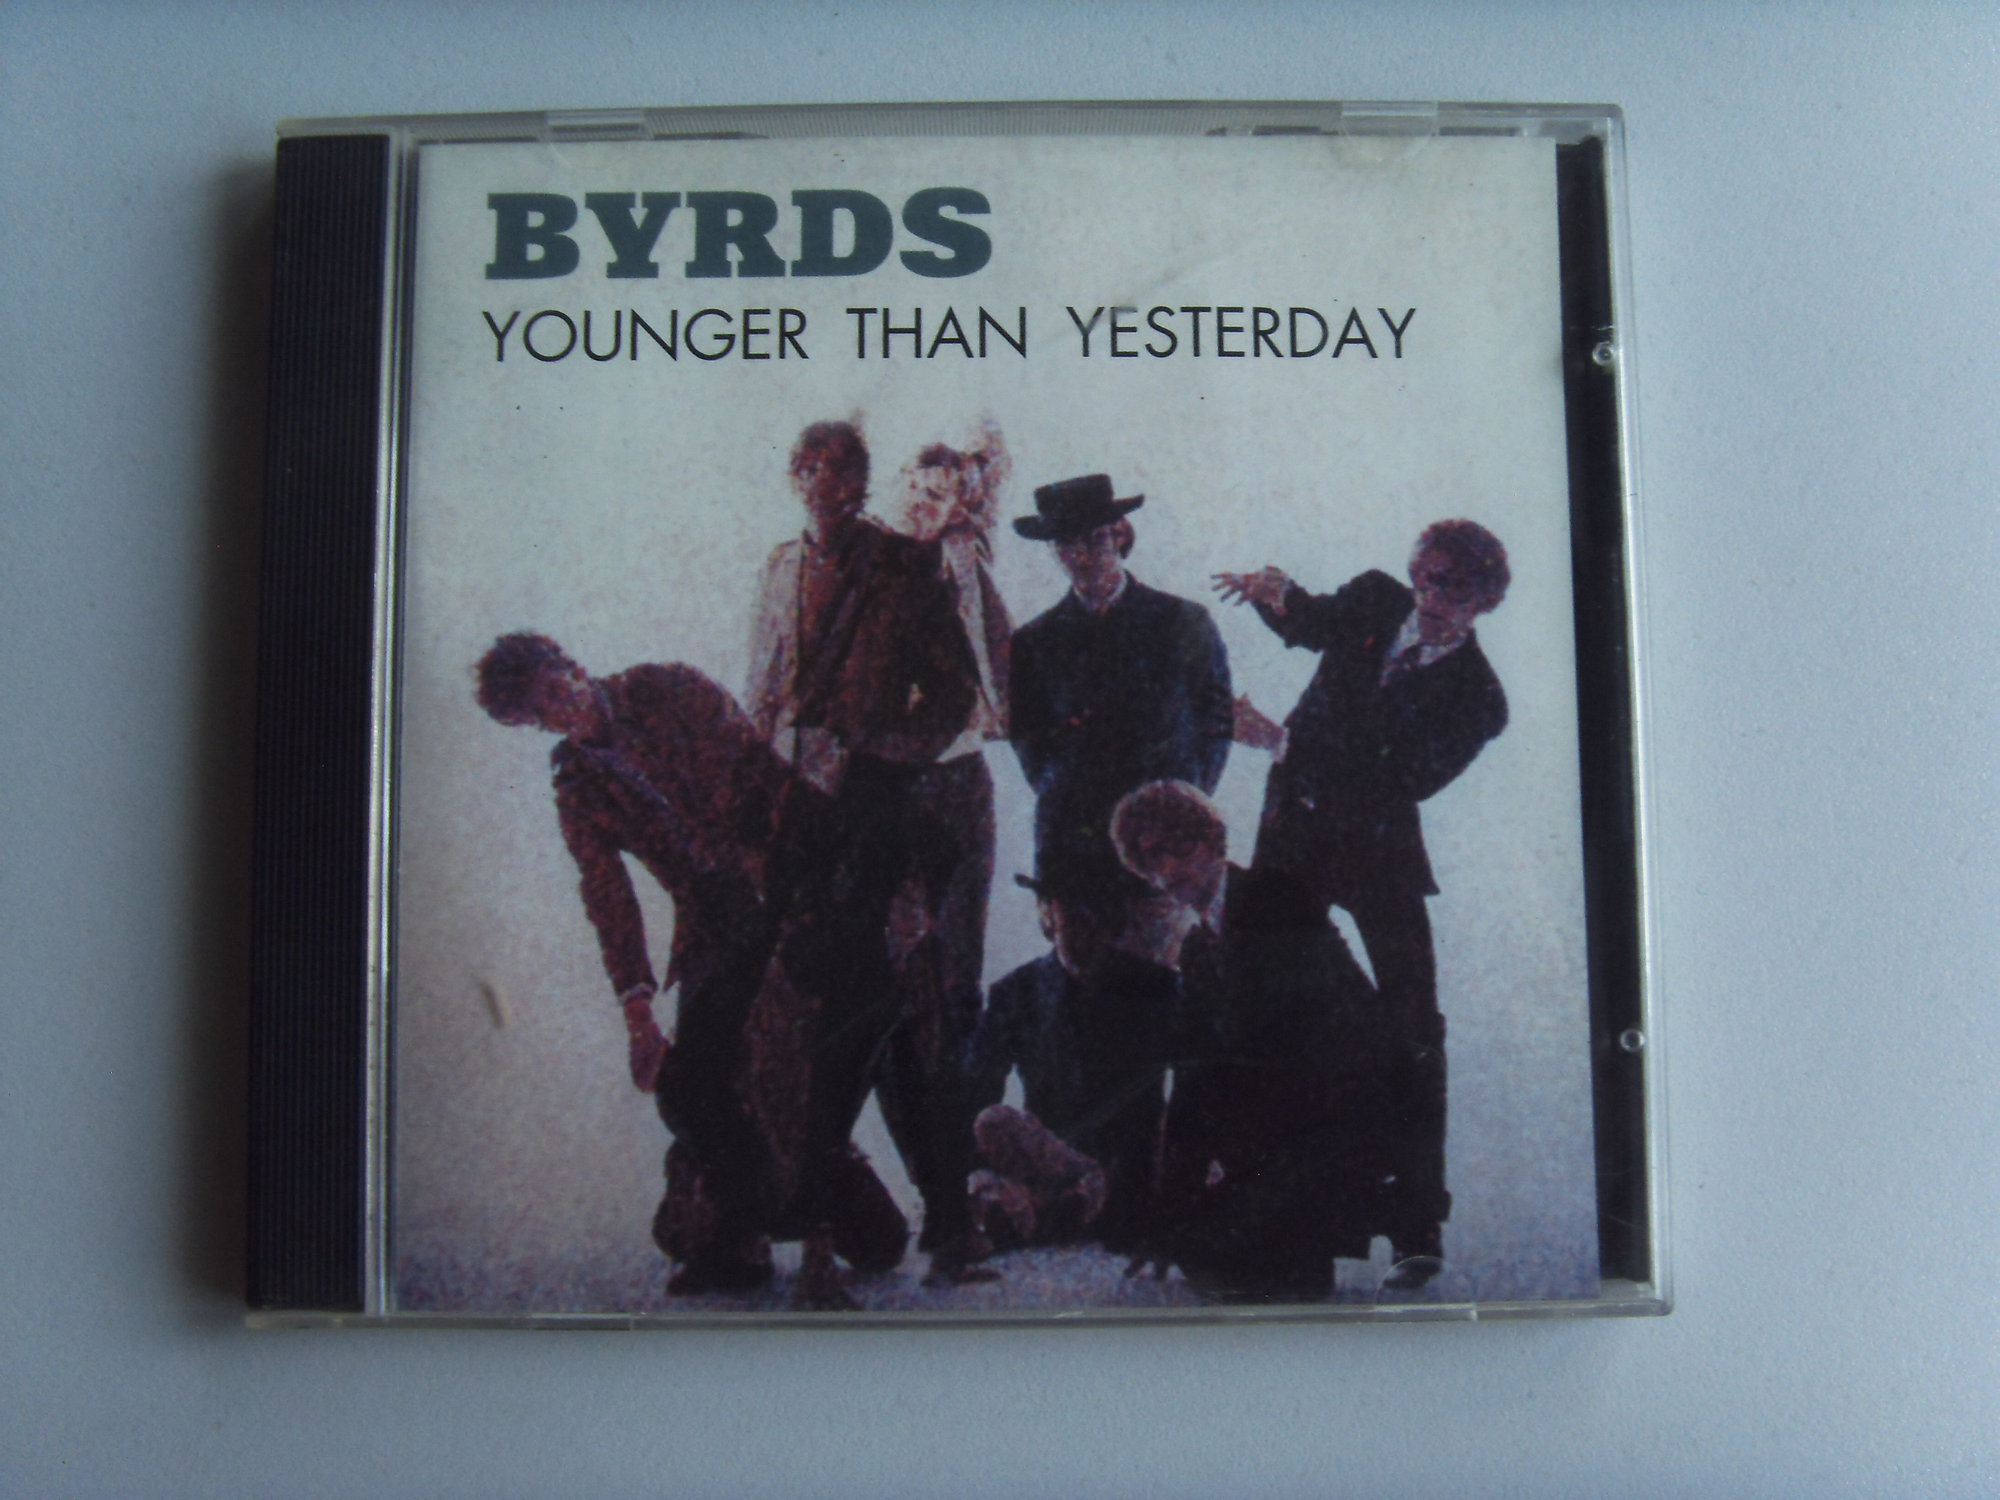 BYRDS Younger than yesterday